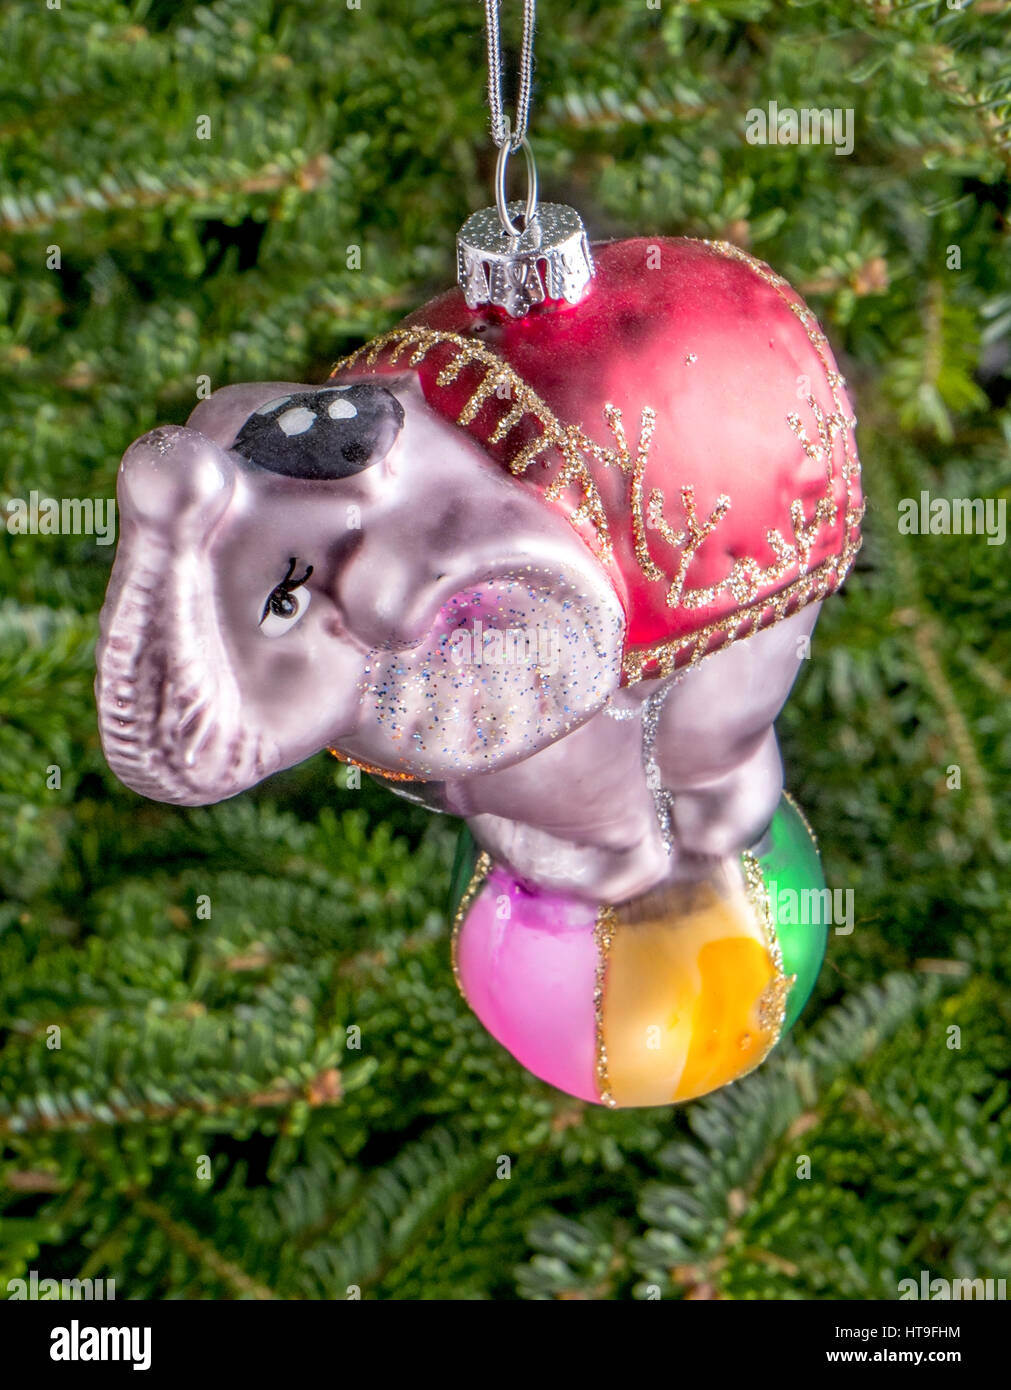 Christmas bauble hanging from a tree in the shape of a Circus Elephant balancing on a Ball Stock Photo